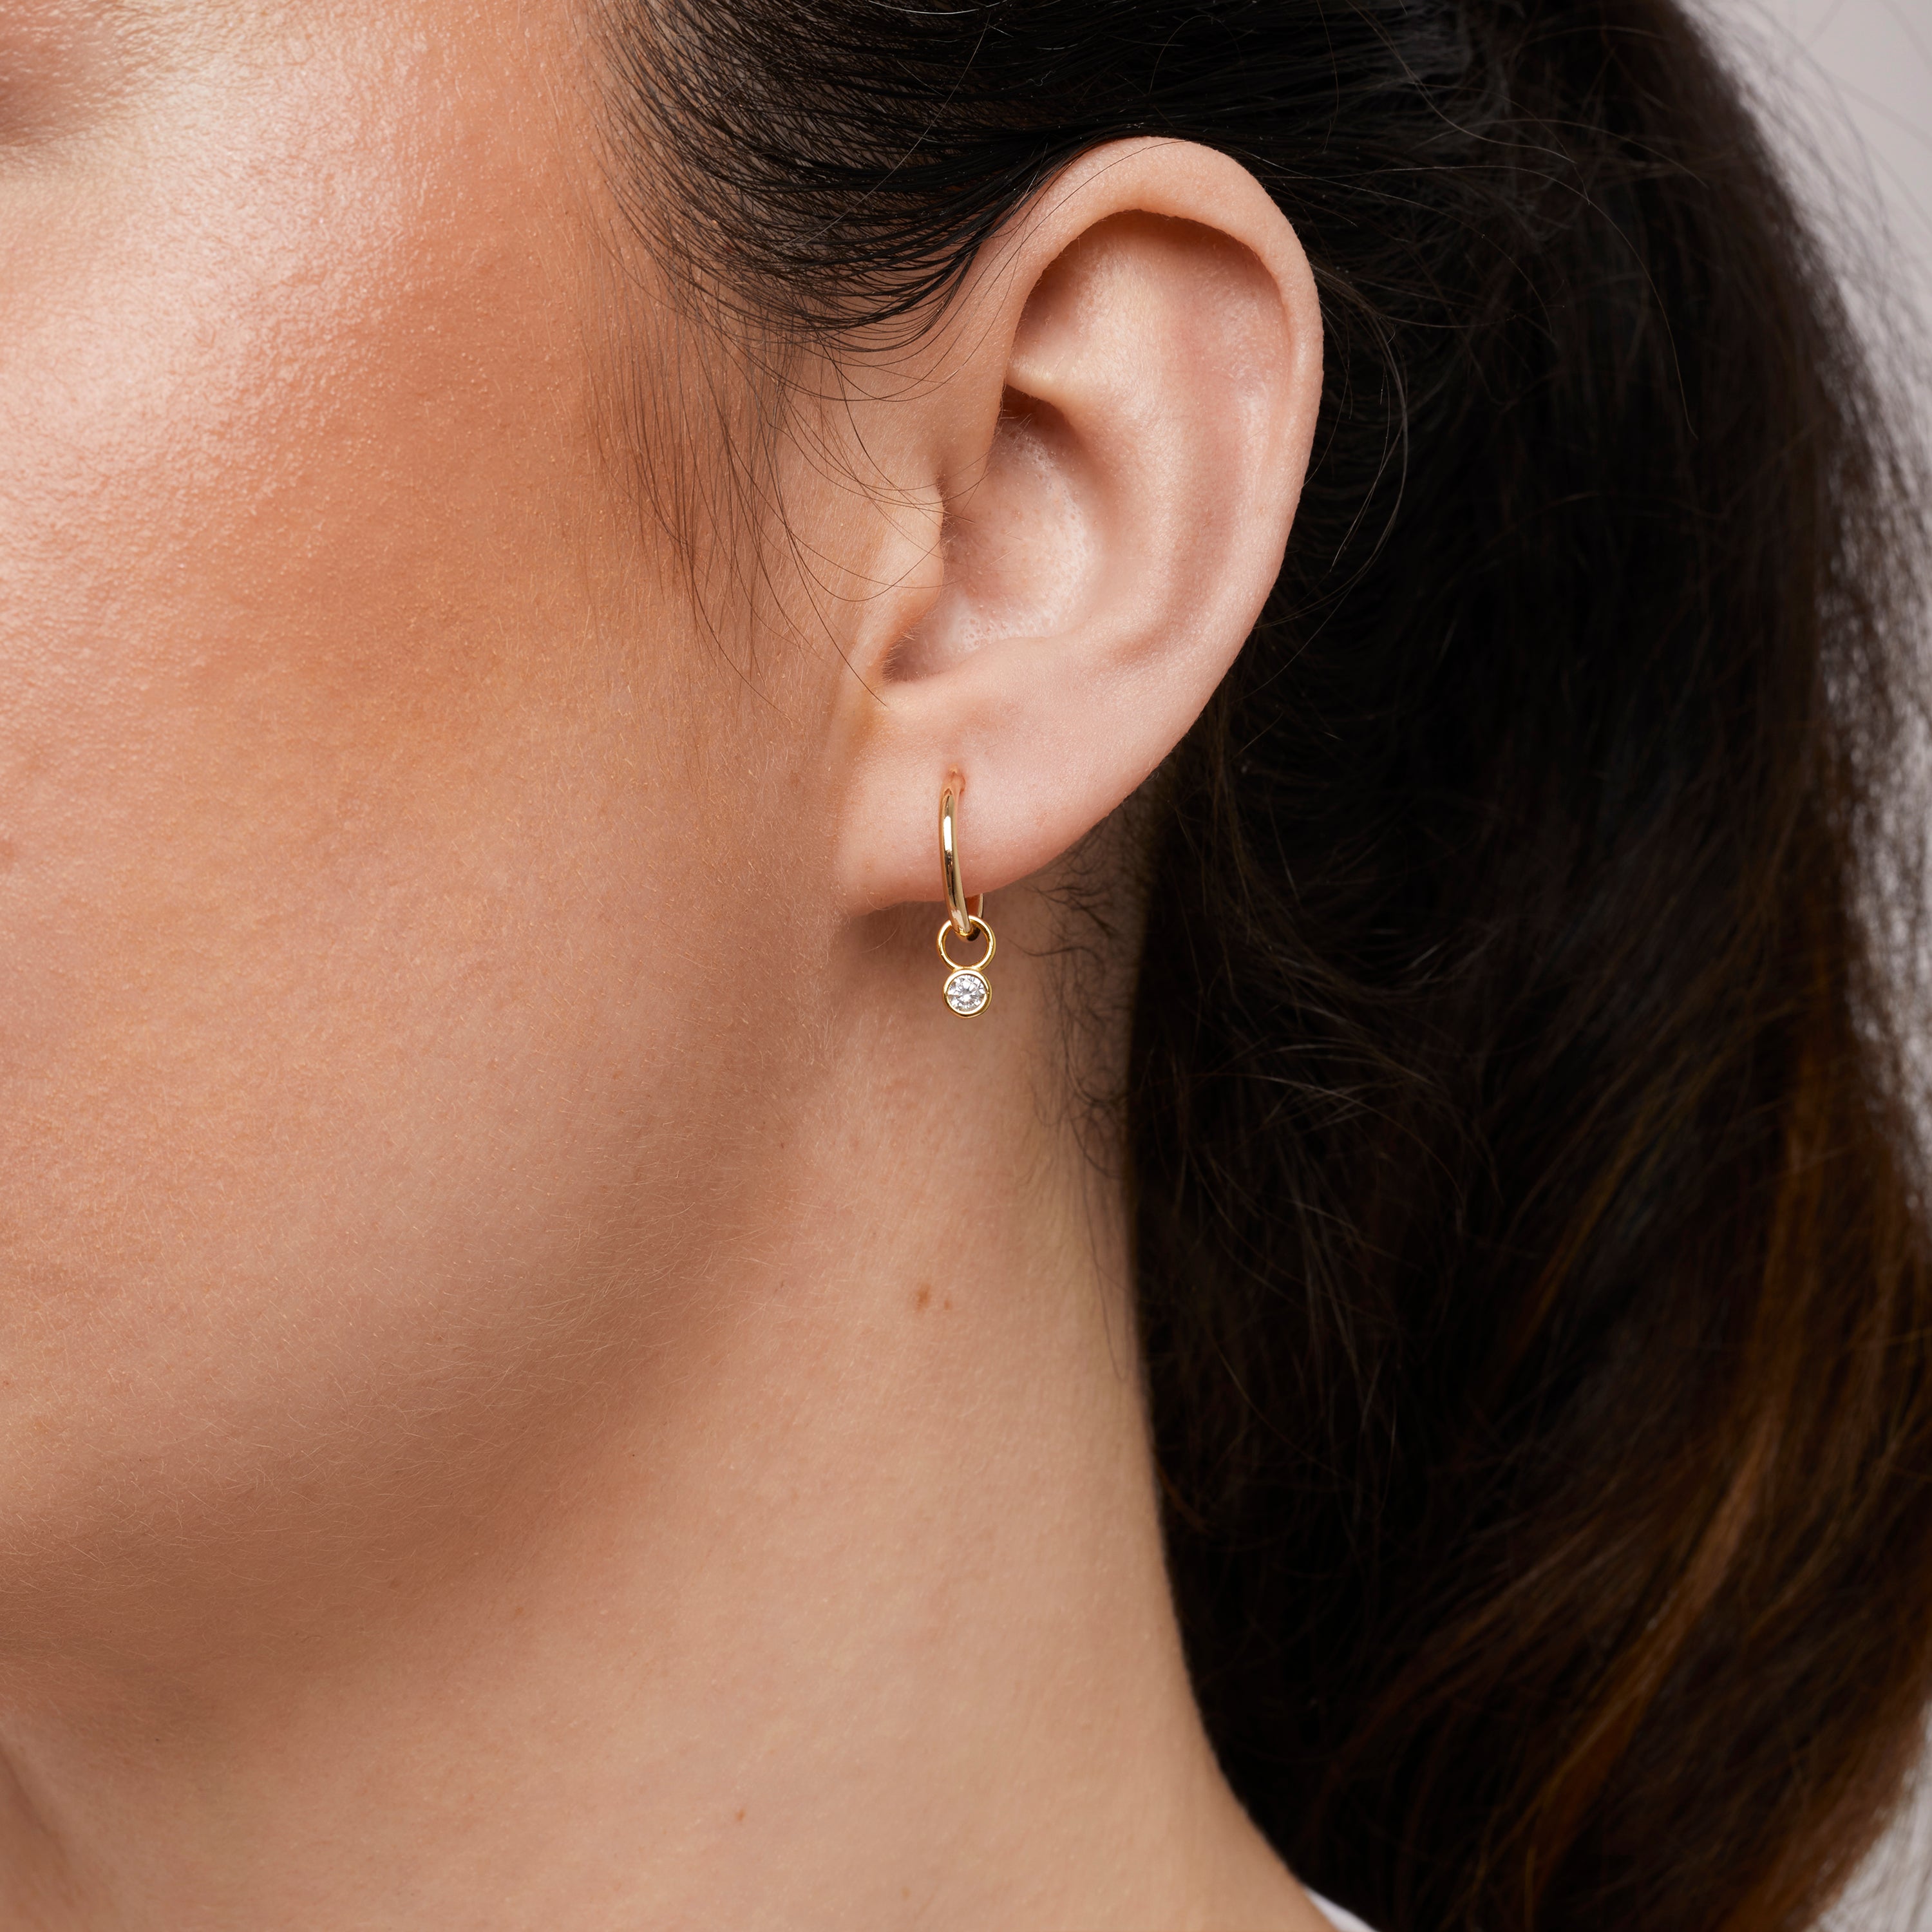 A model wearing the Mini Gemstone Hoop Charms are made with high-quality materials, including 18K gold plating over 925 Sterling Silver. These charms are both non-tarnish and water resistant. The perfect combination of style and durability.